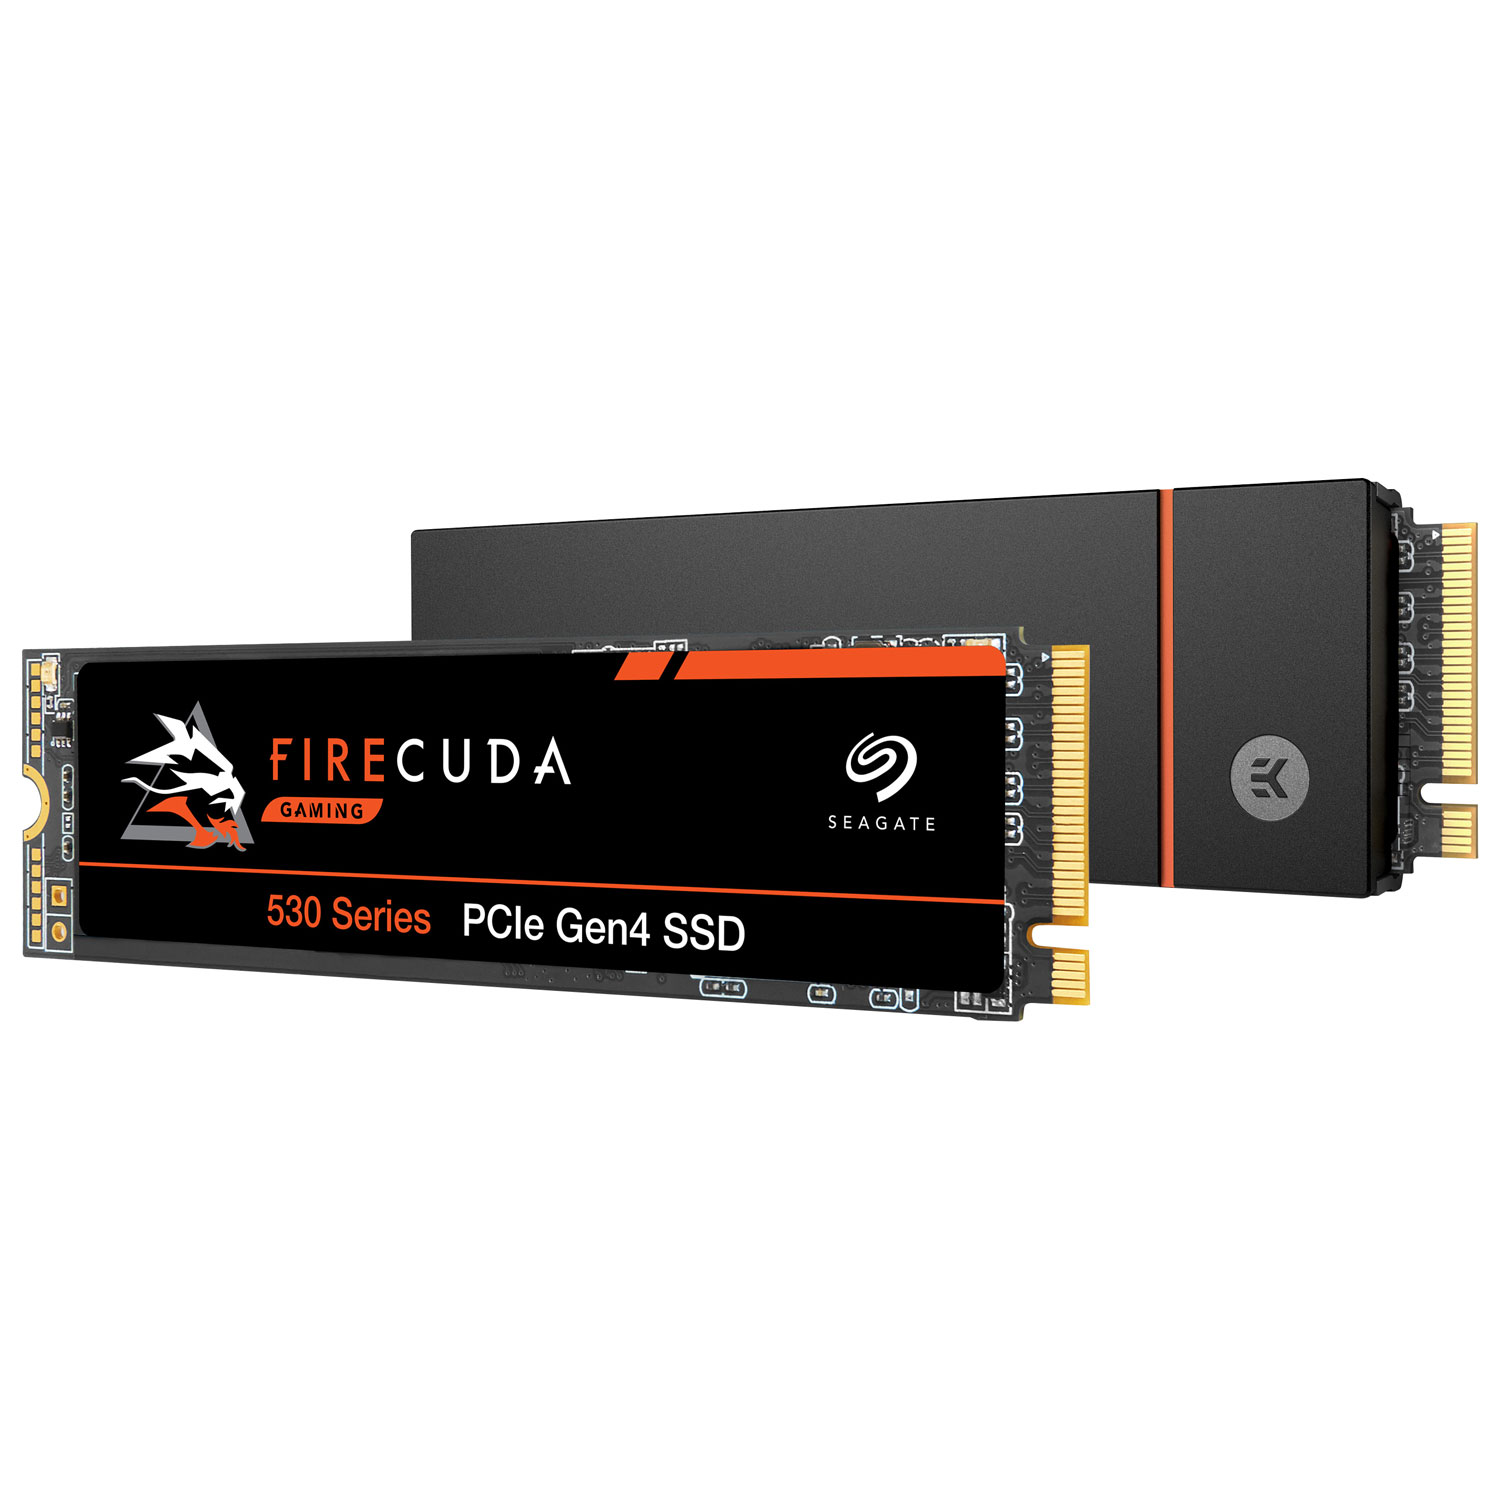 Seagate Firecuda 530 Nvme - Where to Buy it at the Best Price in Canada?